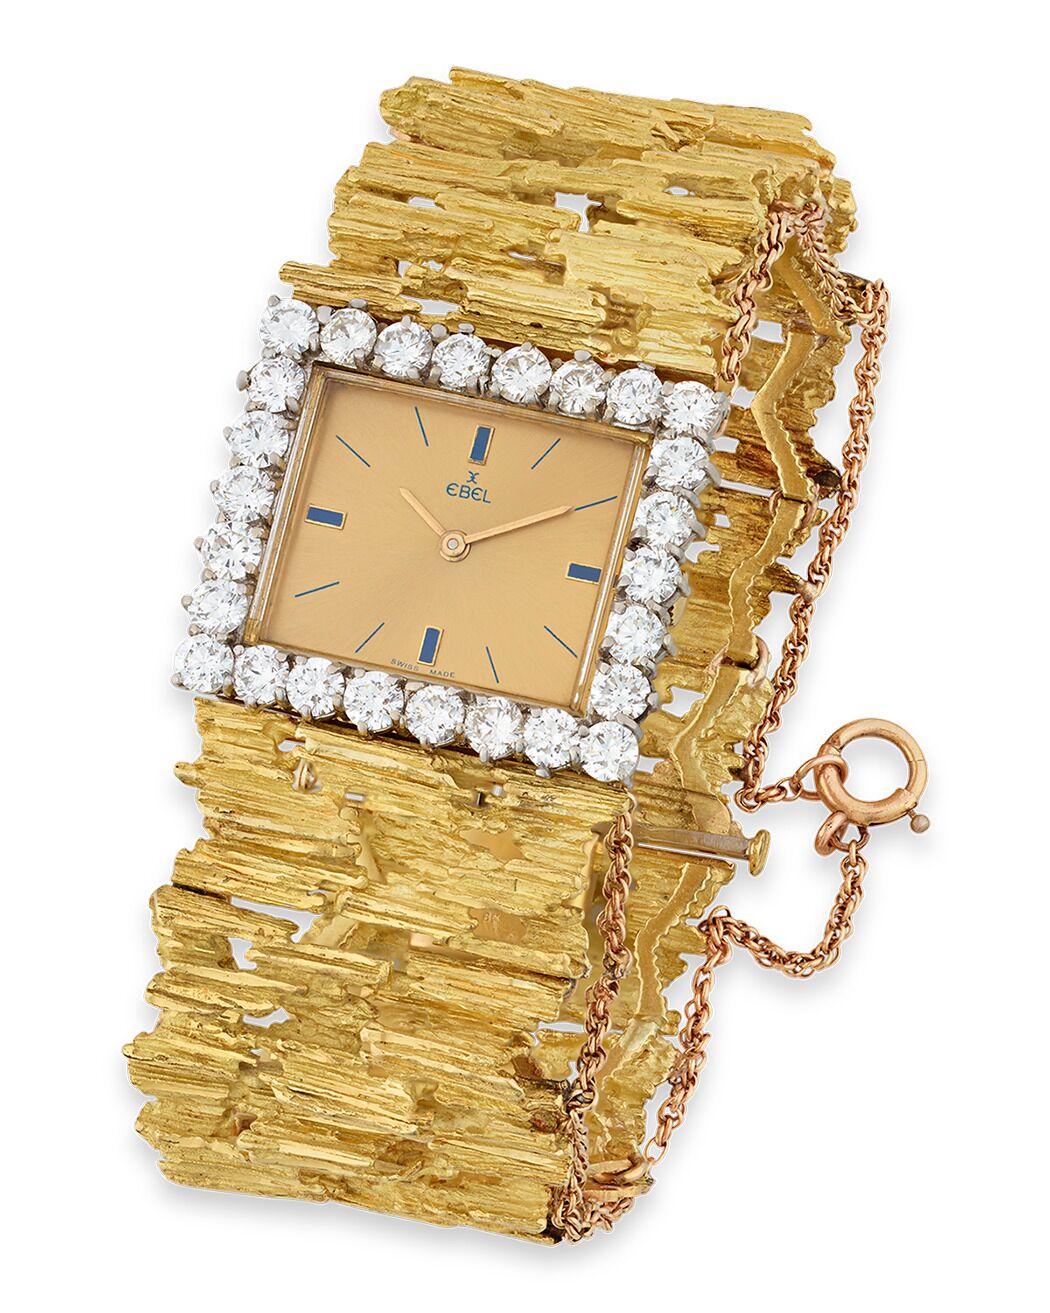 You are currently viewing Elvis Presley Gold Wristwatch Sold